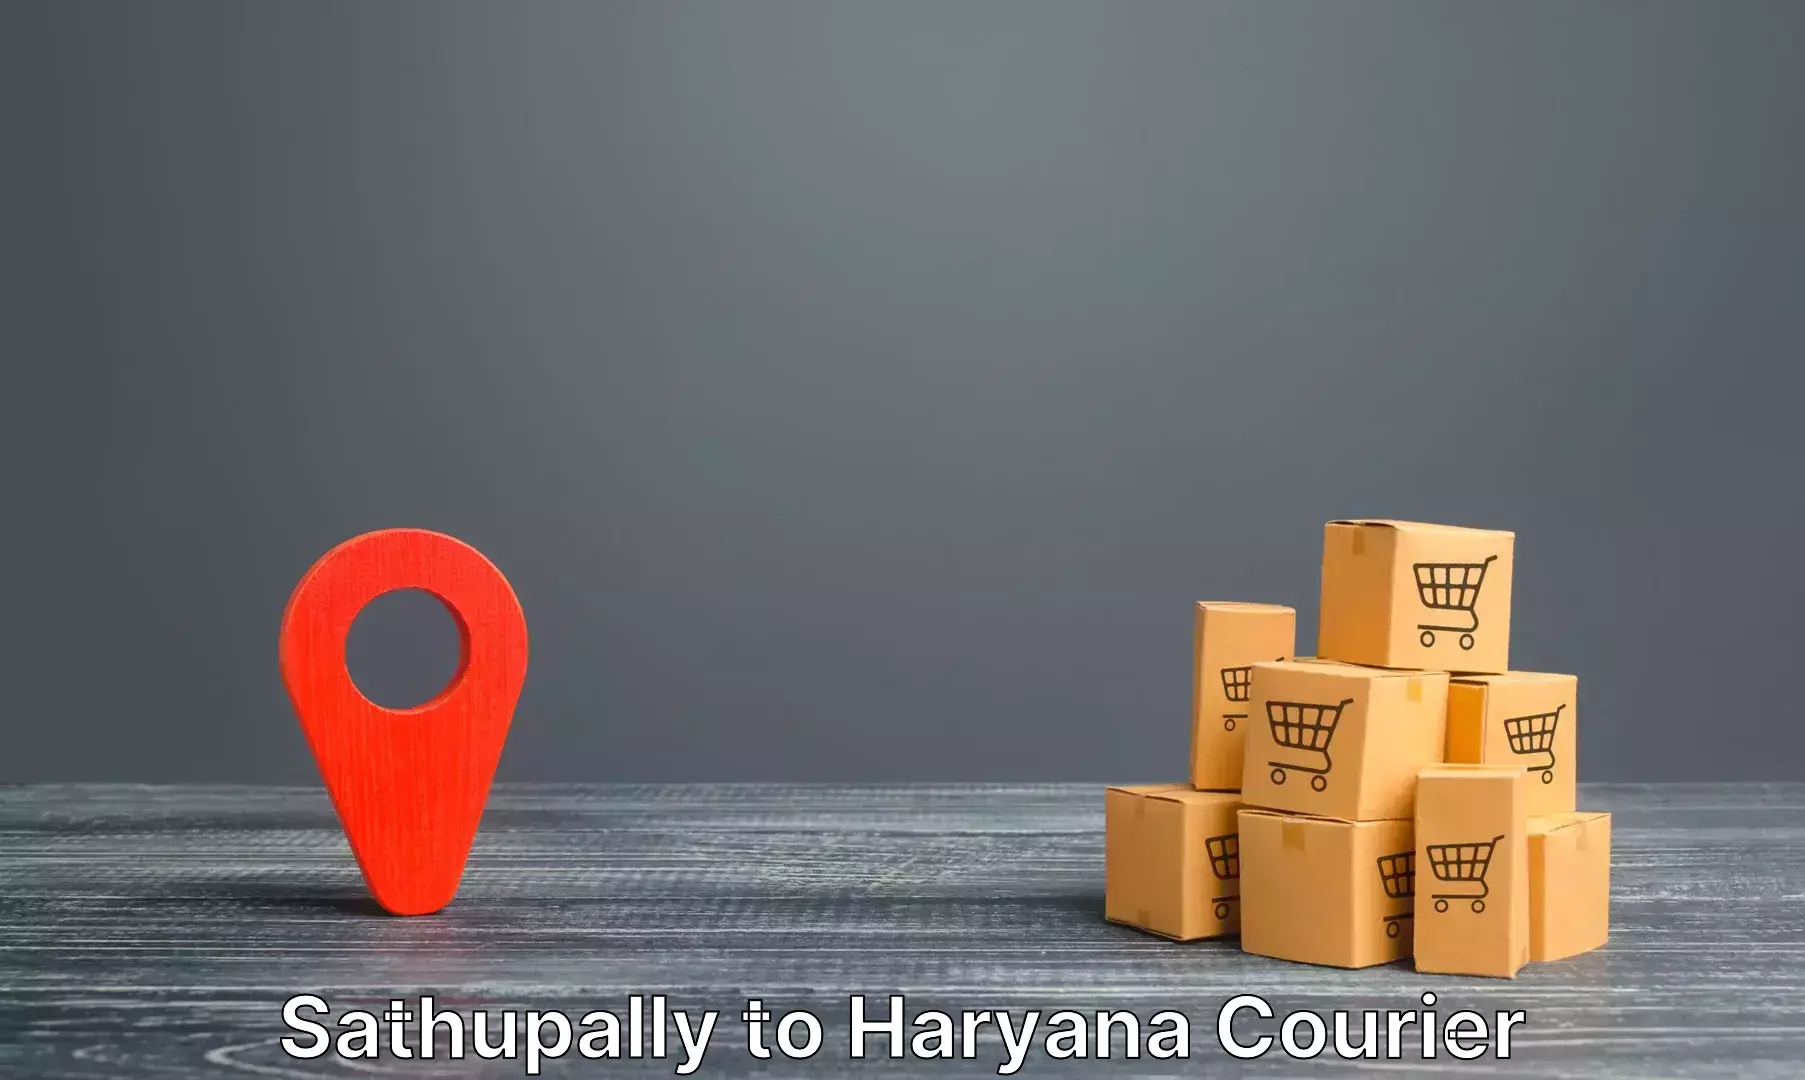 Luggage transport deals Sathupally to Haryana